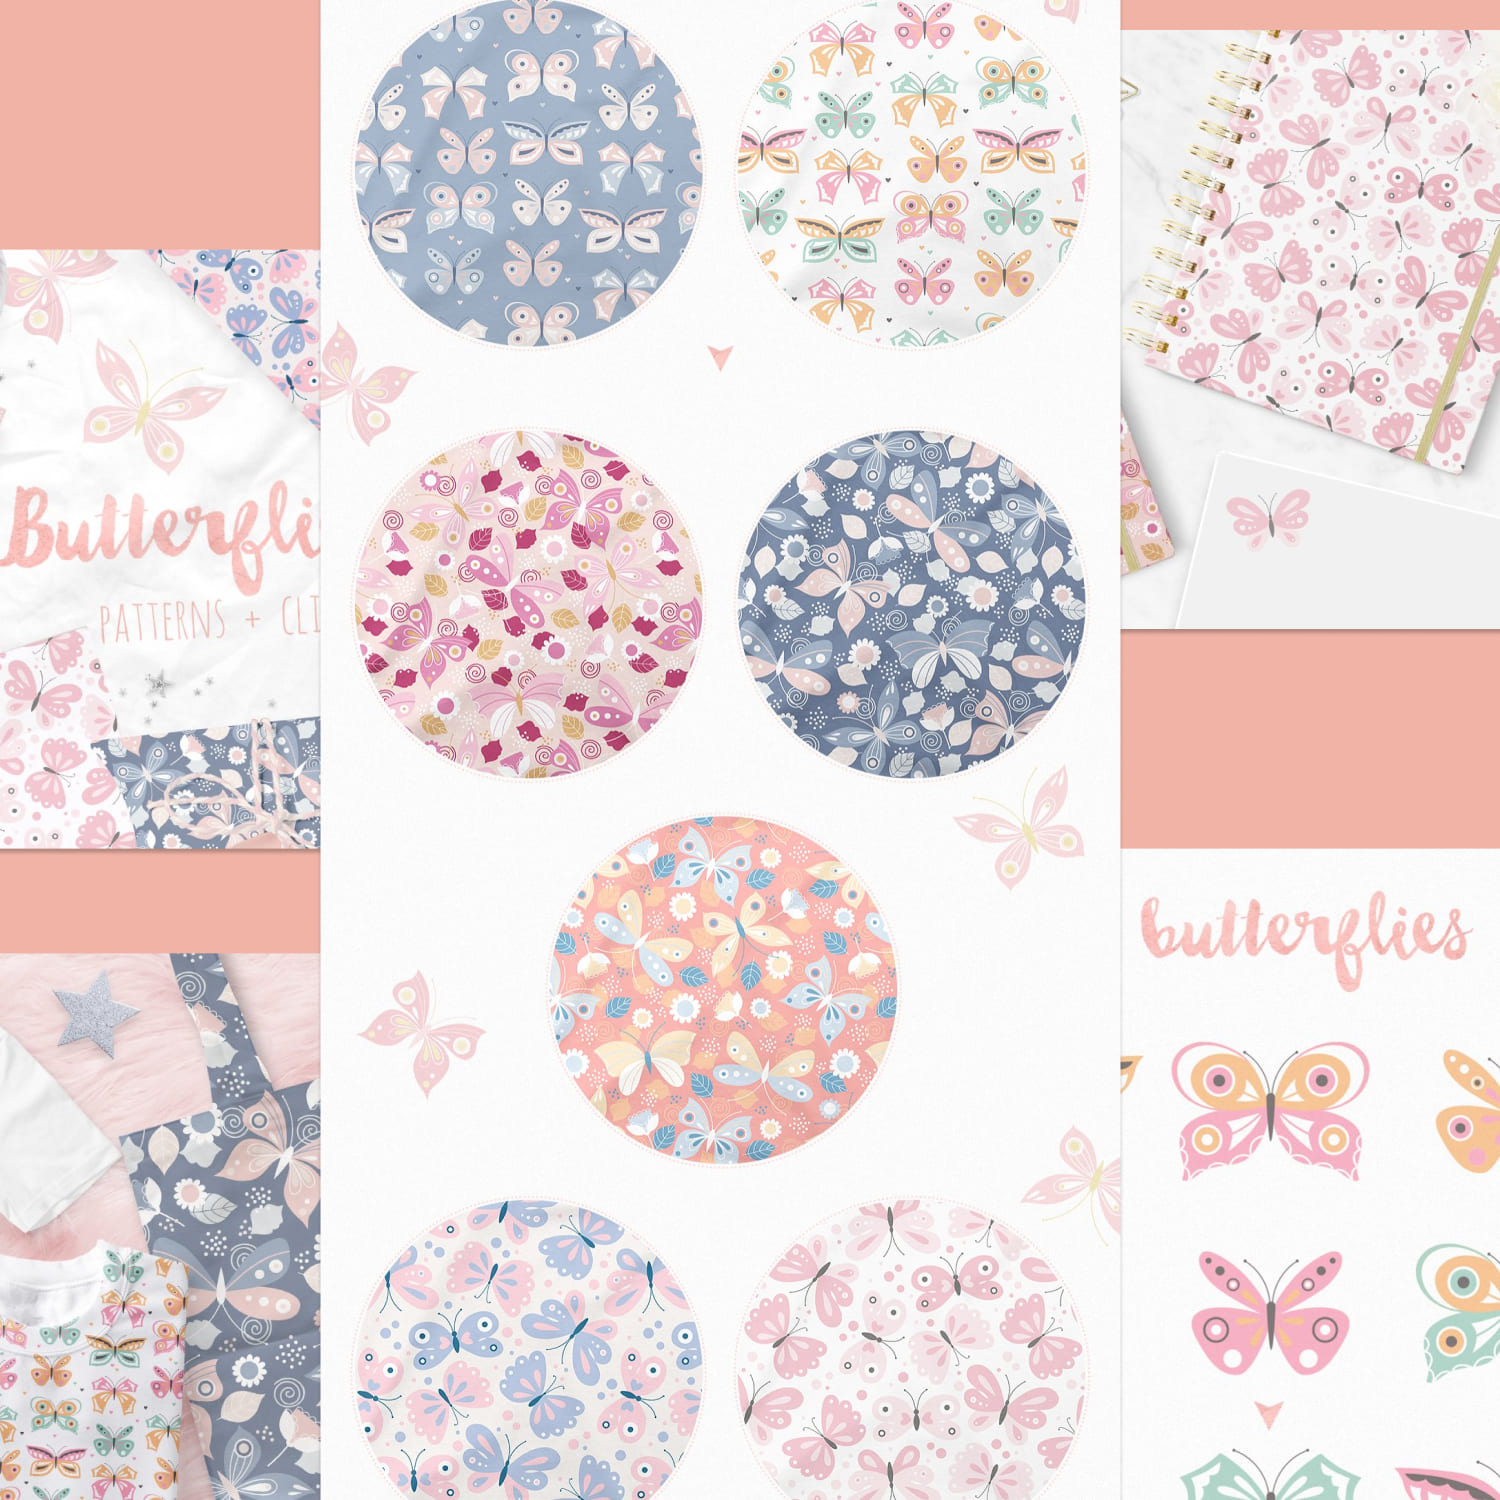 Butterfly vector patterns & clipart cover.